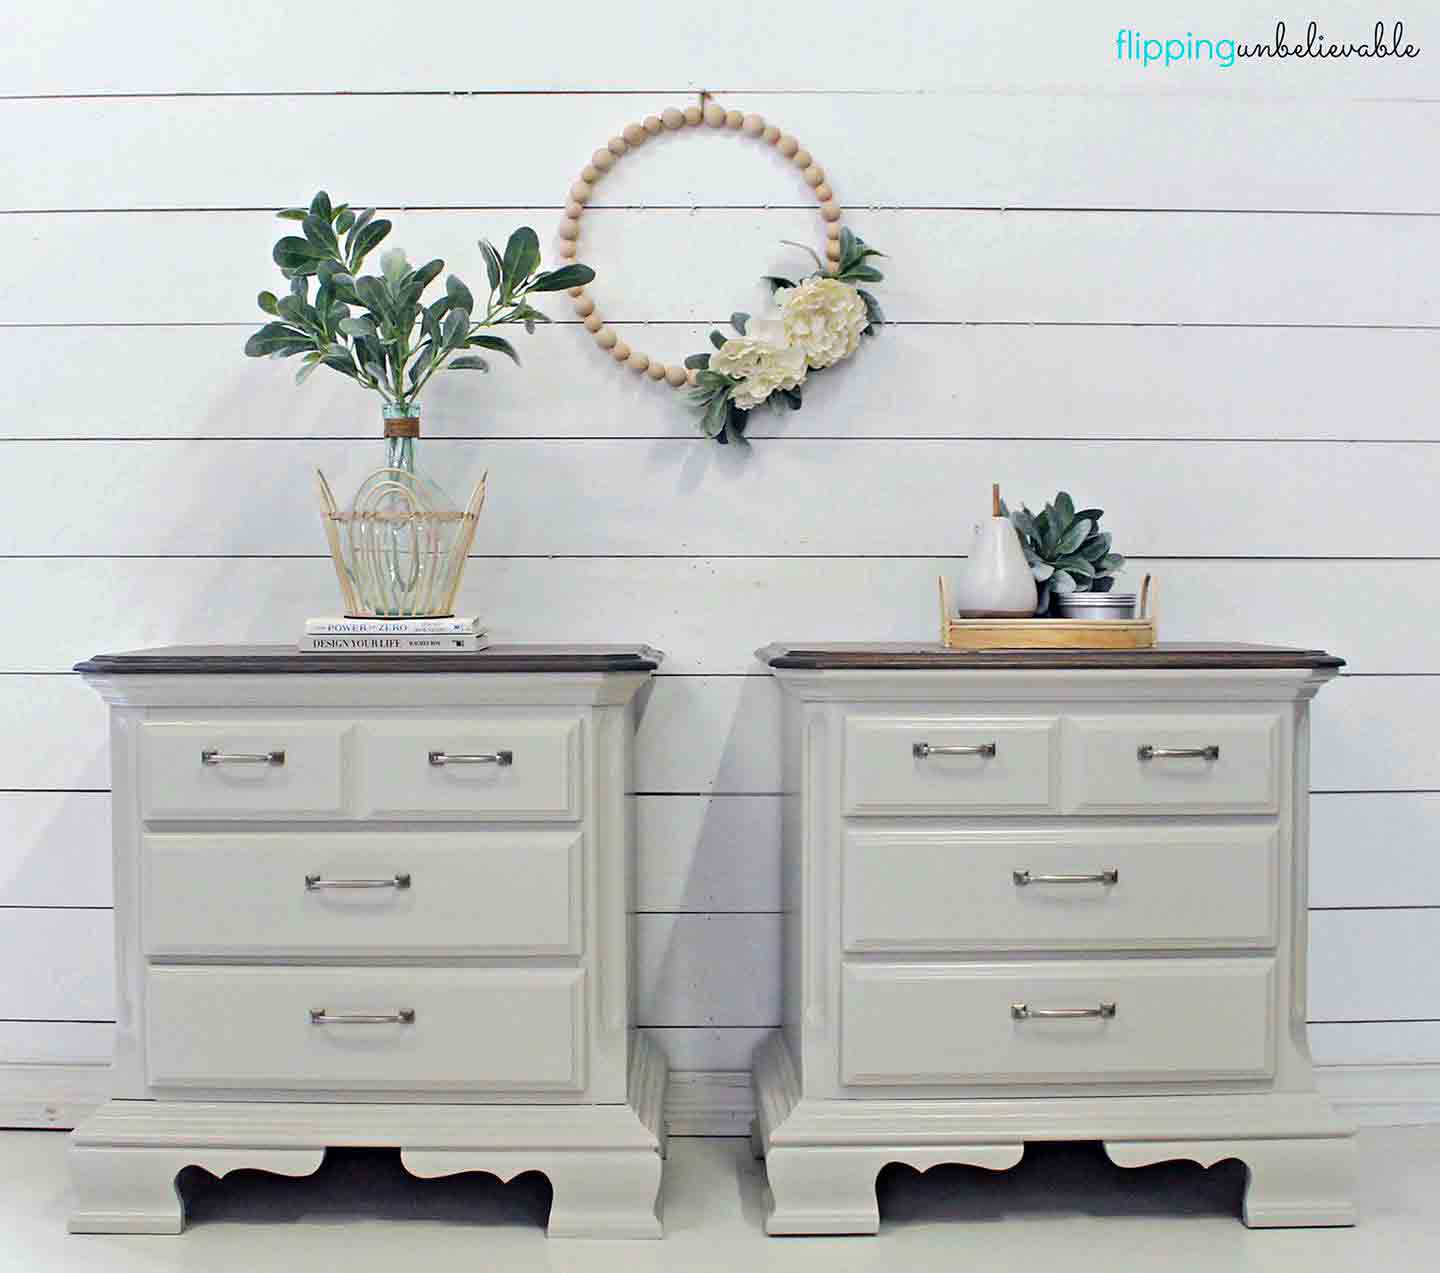 General Finishes - Milk Paint - Water Based - Perfect Gray - Quart